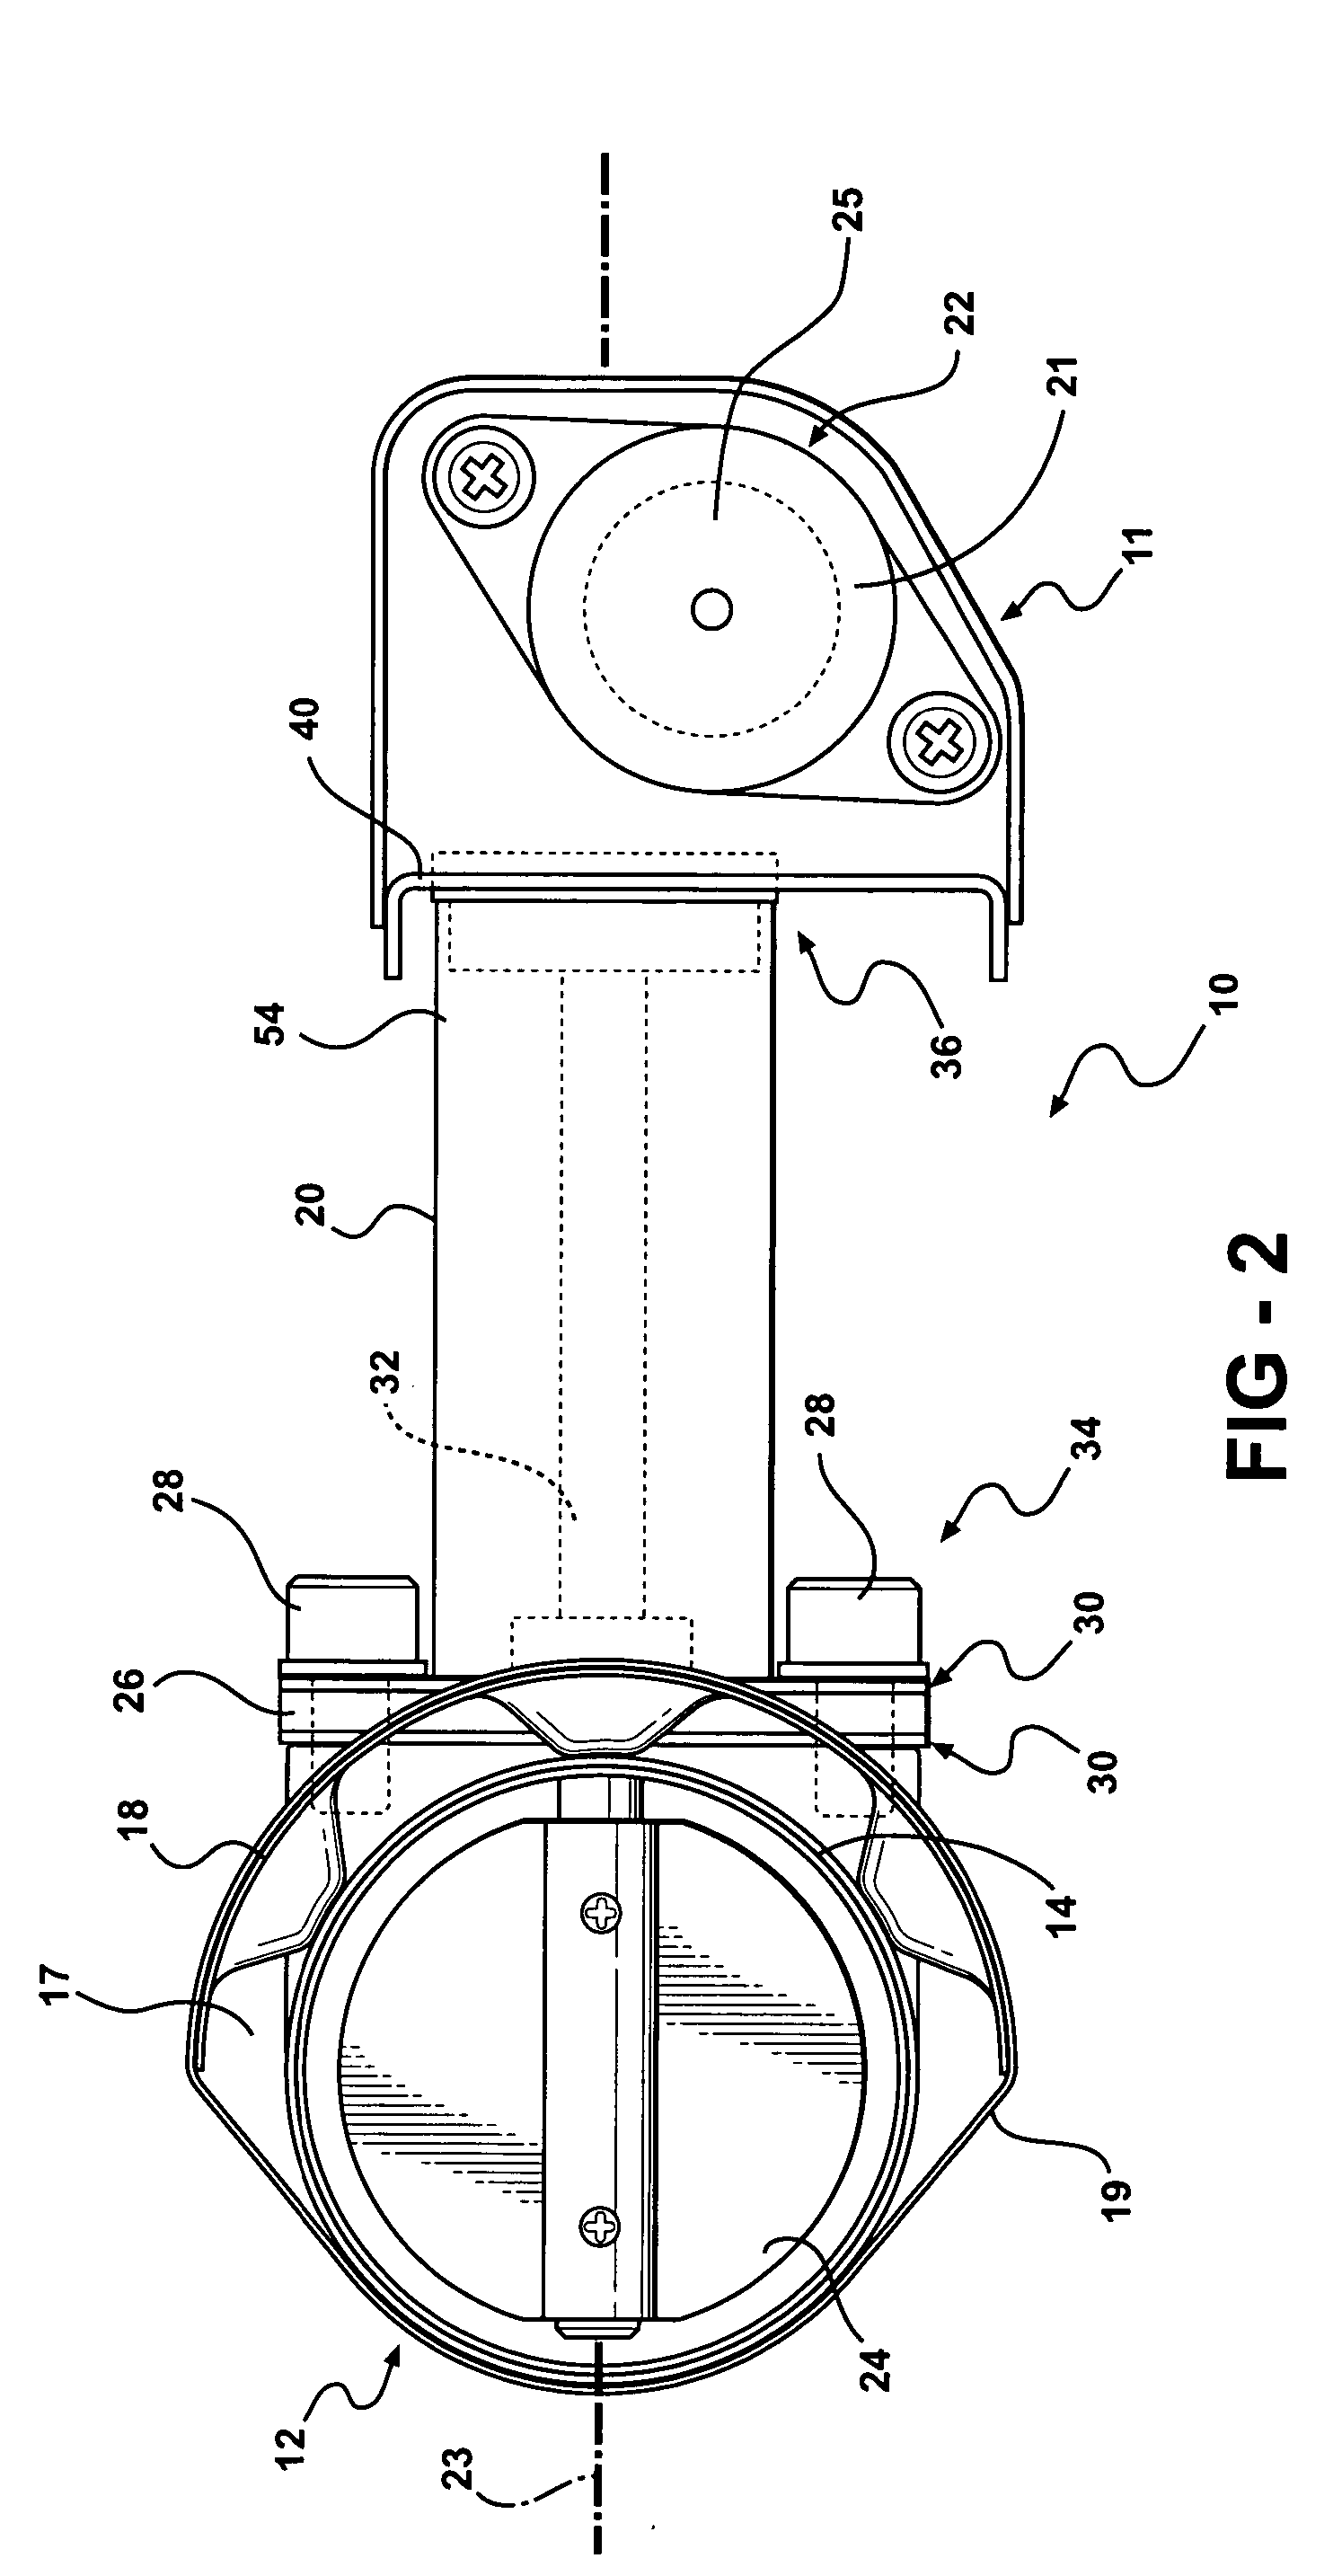 Electrically controlled exhaust valve